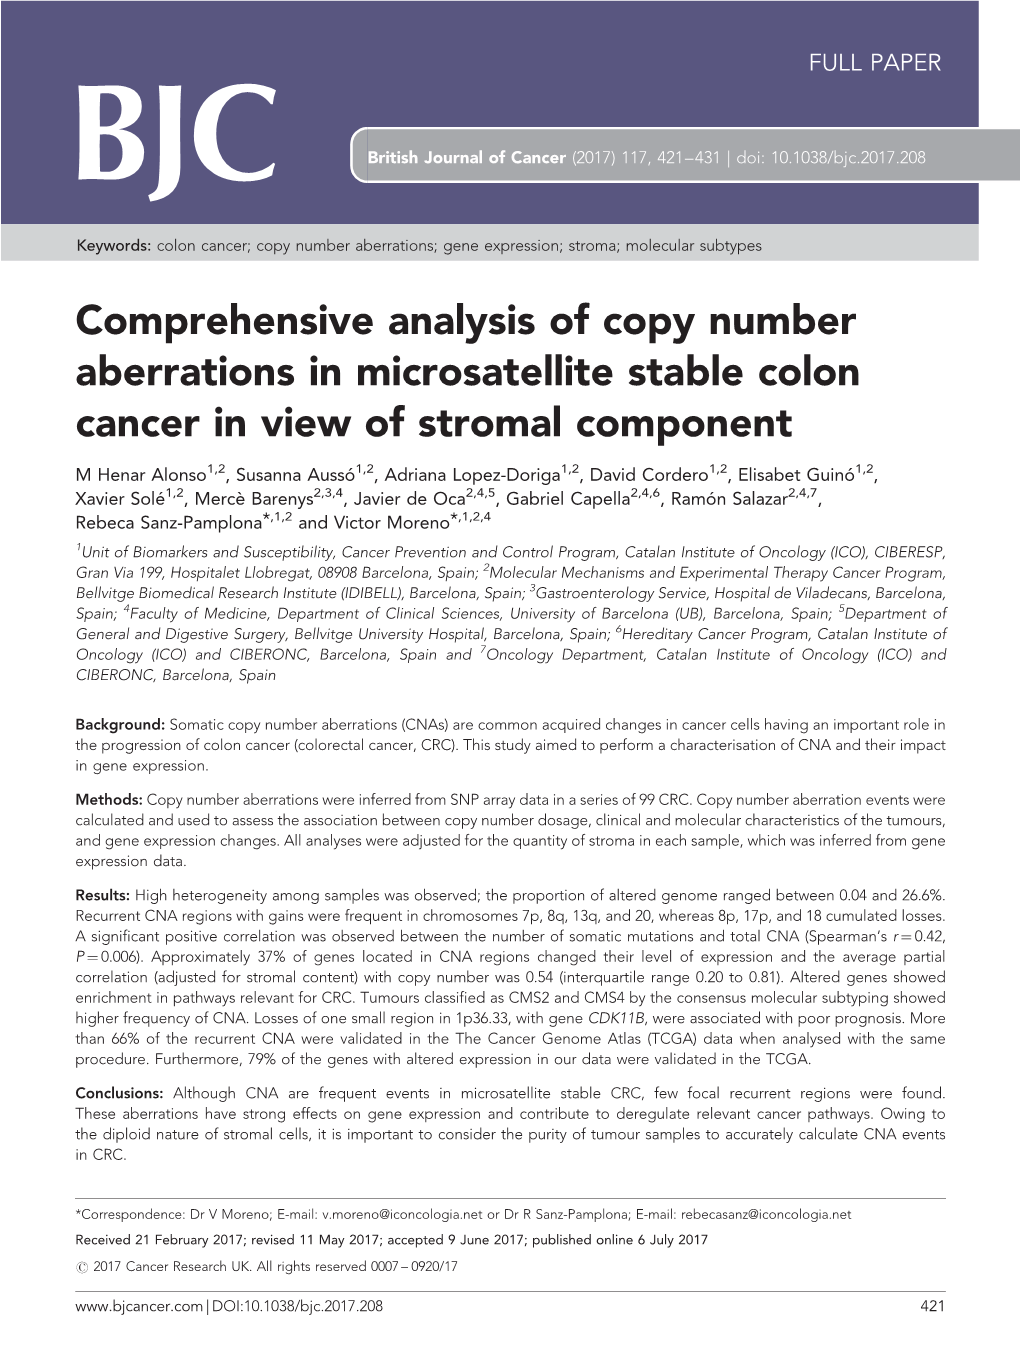 Comprehensive Analysis of Copy Number Aberrations in Microsatellite Stable Colon Cancer in View of Stromal Component